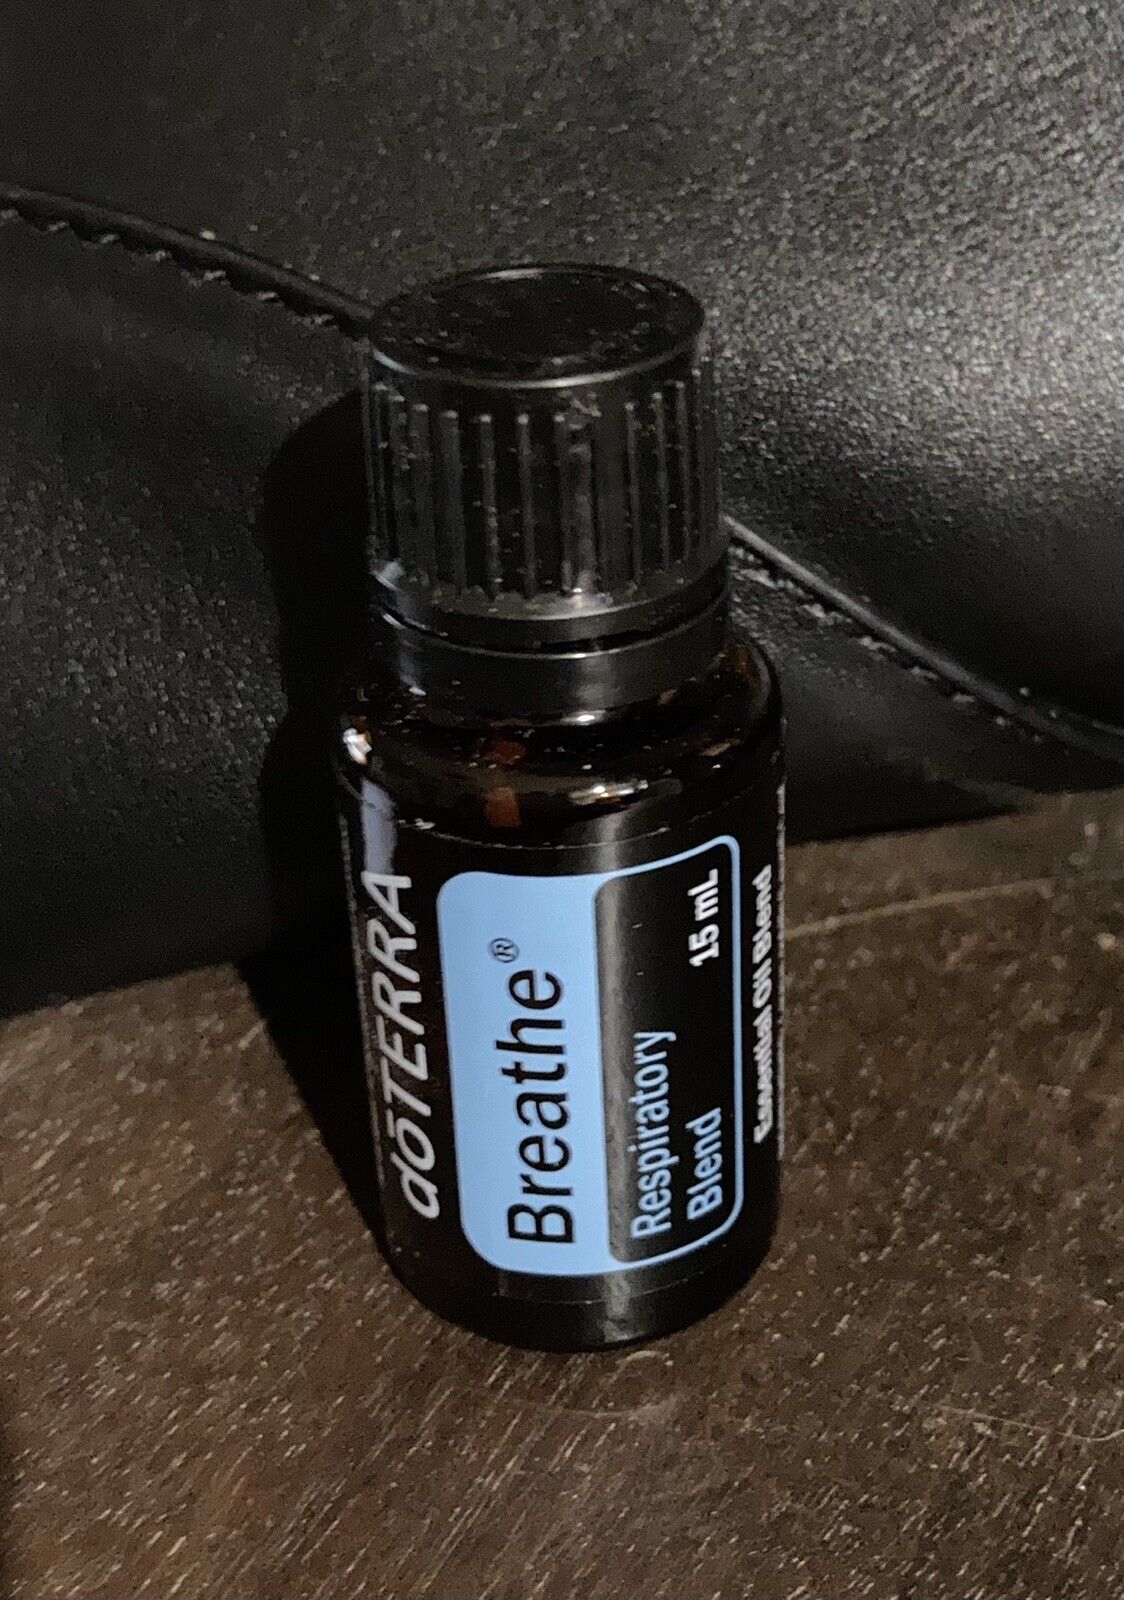 doTERRA Breathe Essential Oil 15ml New! Exp 2026 Free US Shipping